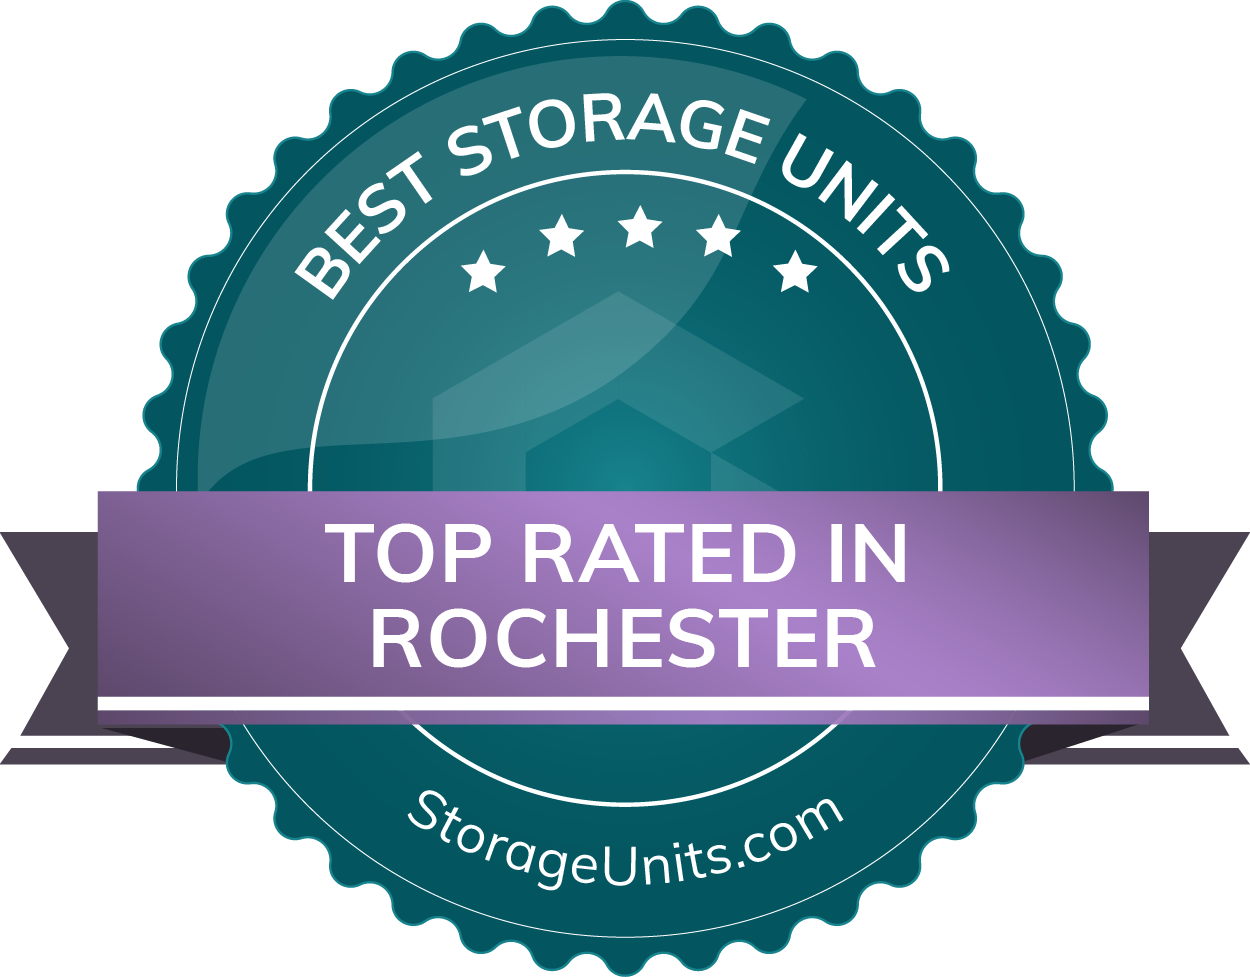 Best Self Storage Units in Rochester, New York of 2022